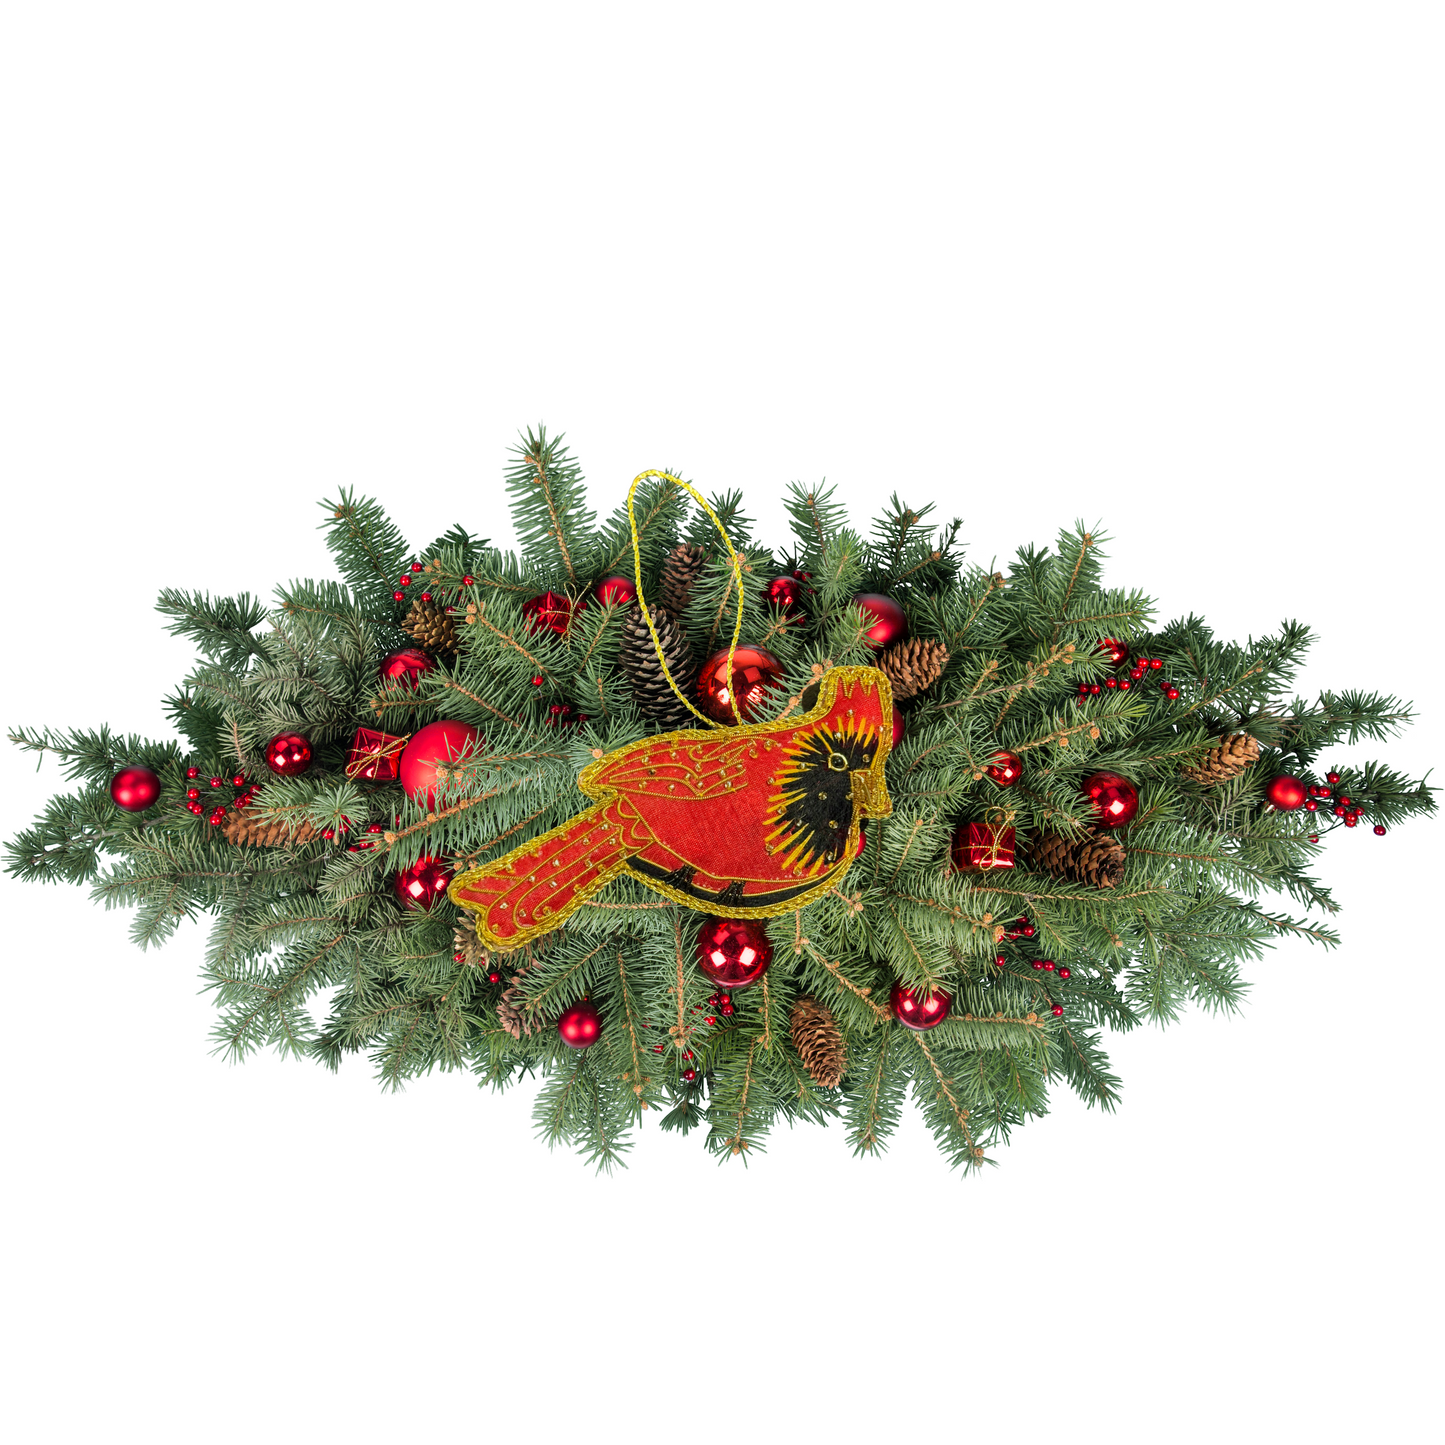 Red Cardinal with Zari Embroidery as a Garland ornament